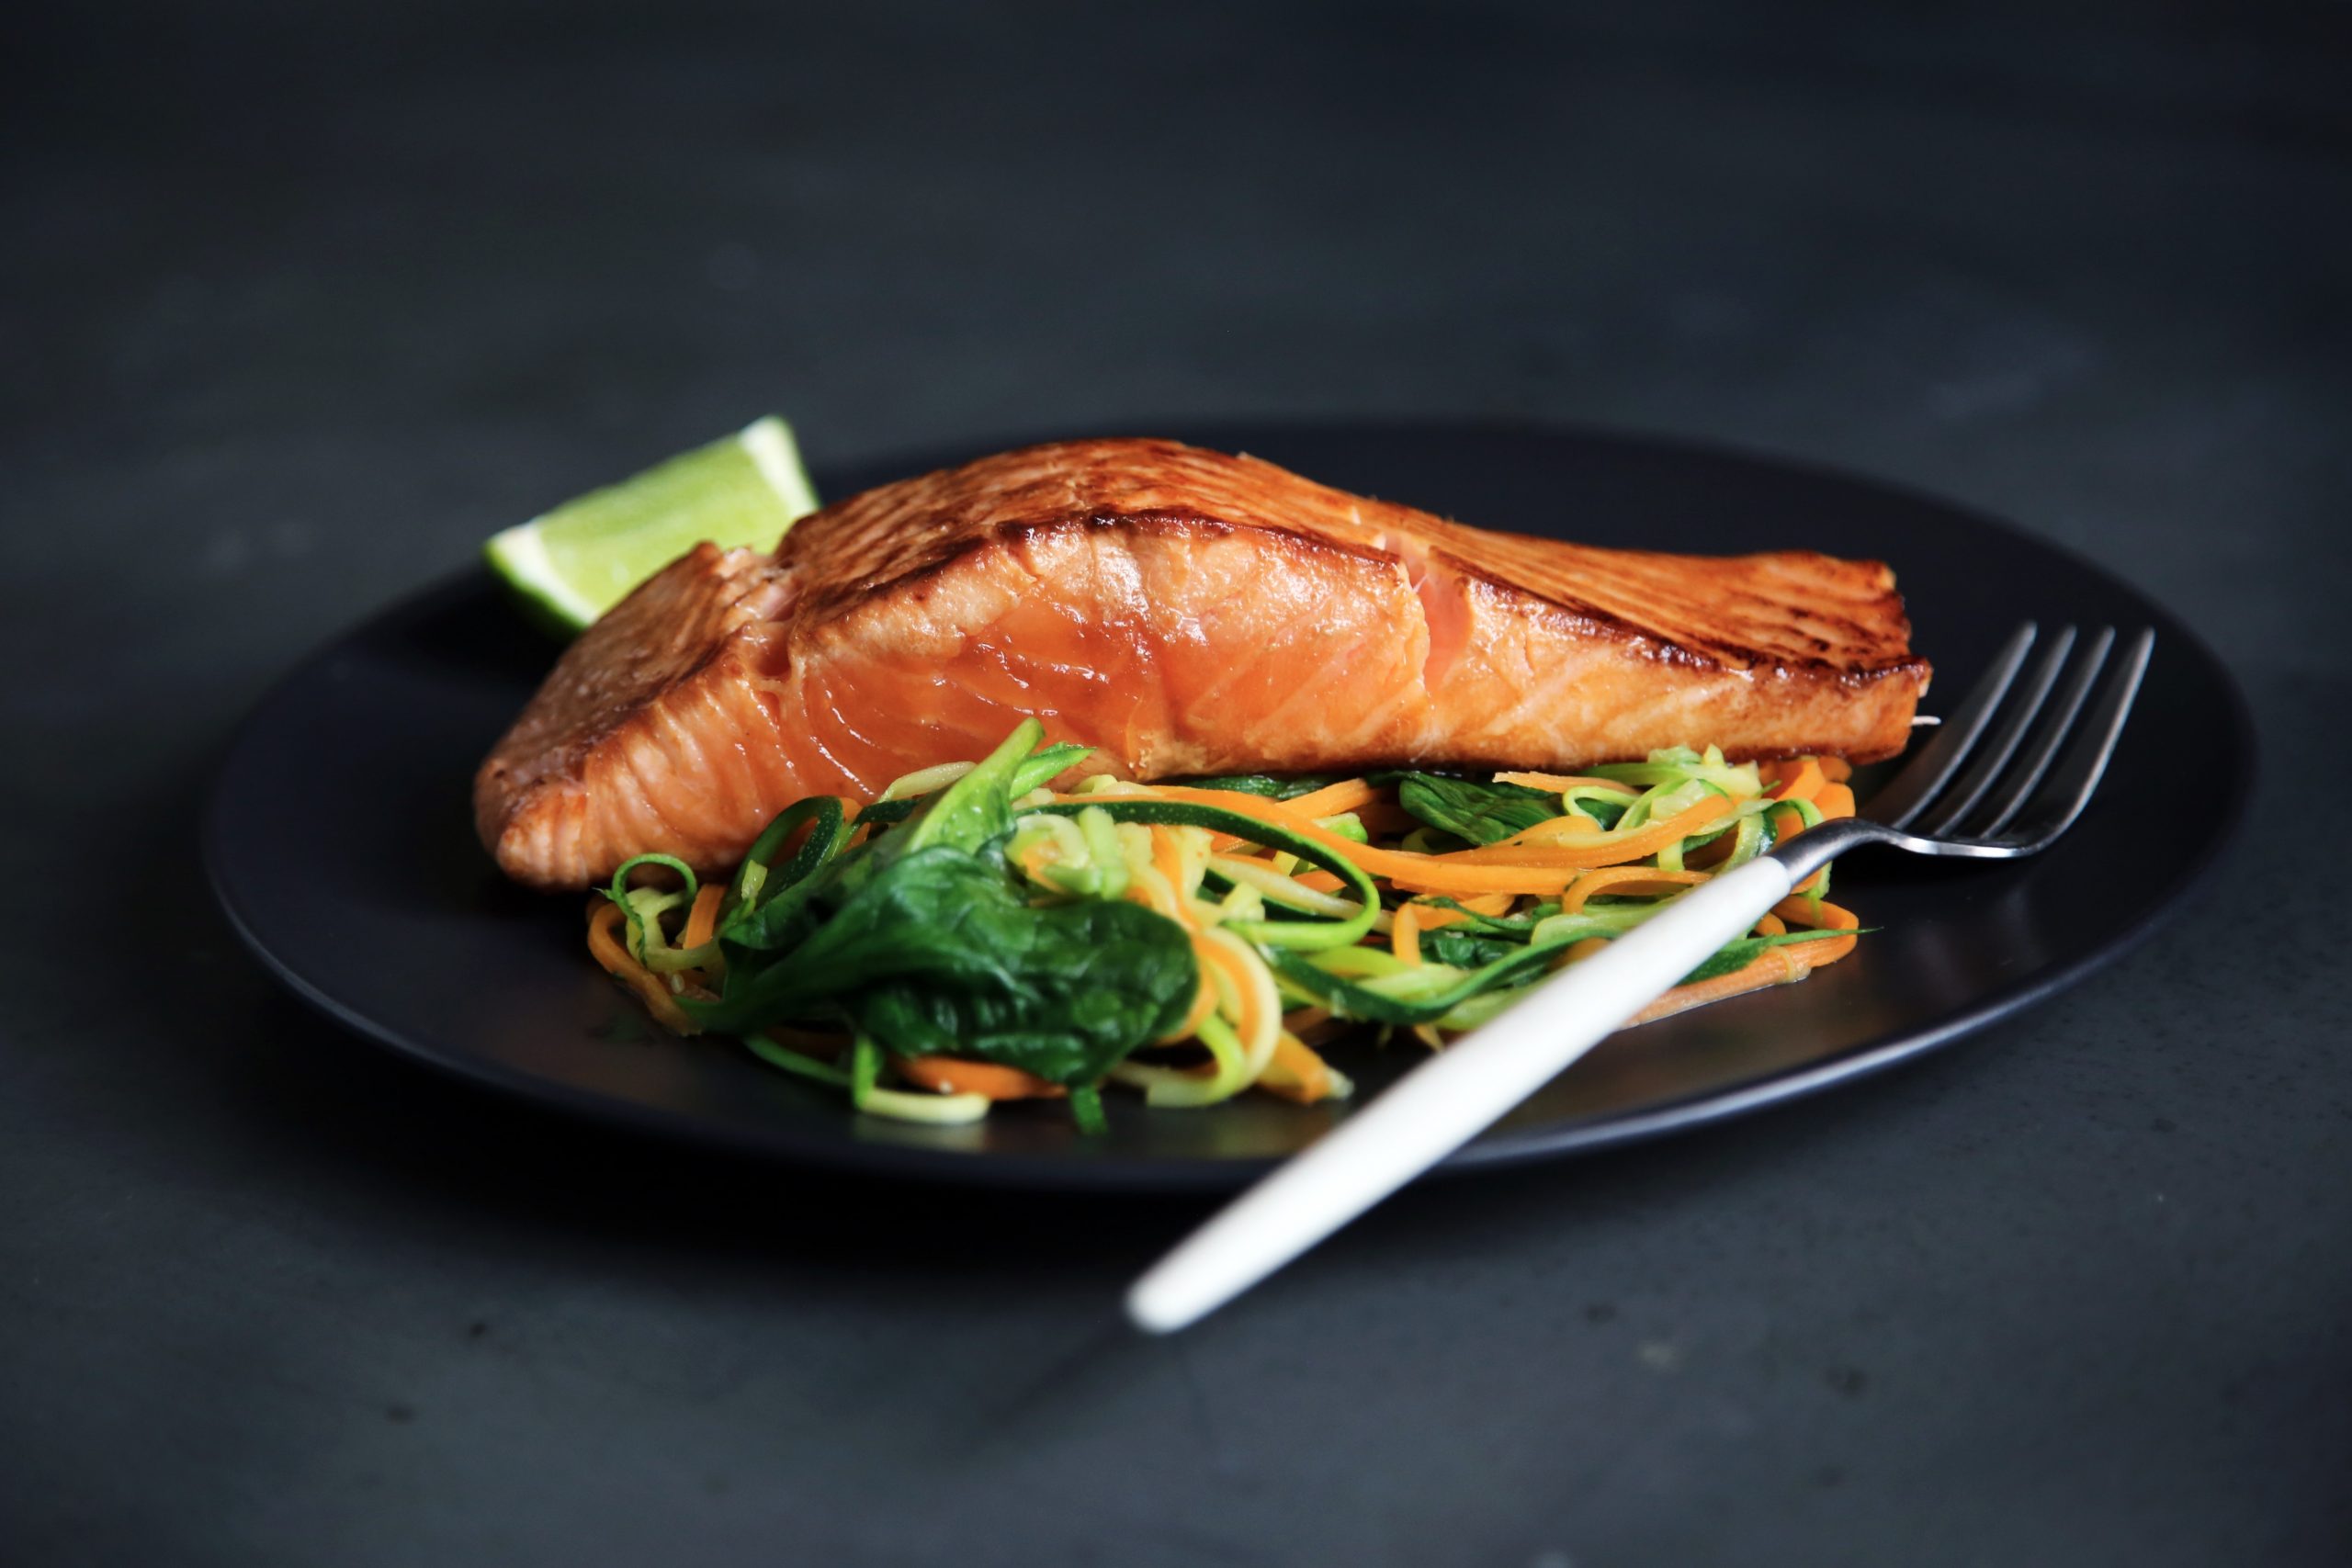 Hair is made from keratin; choose oily fish such as salmon for healthy hair